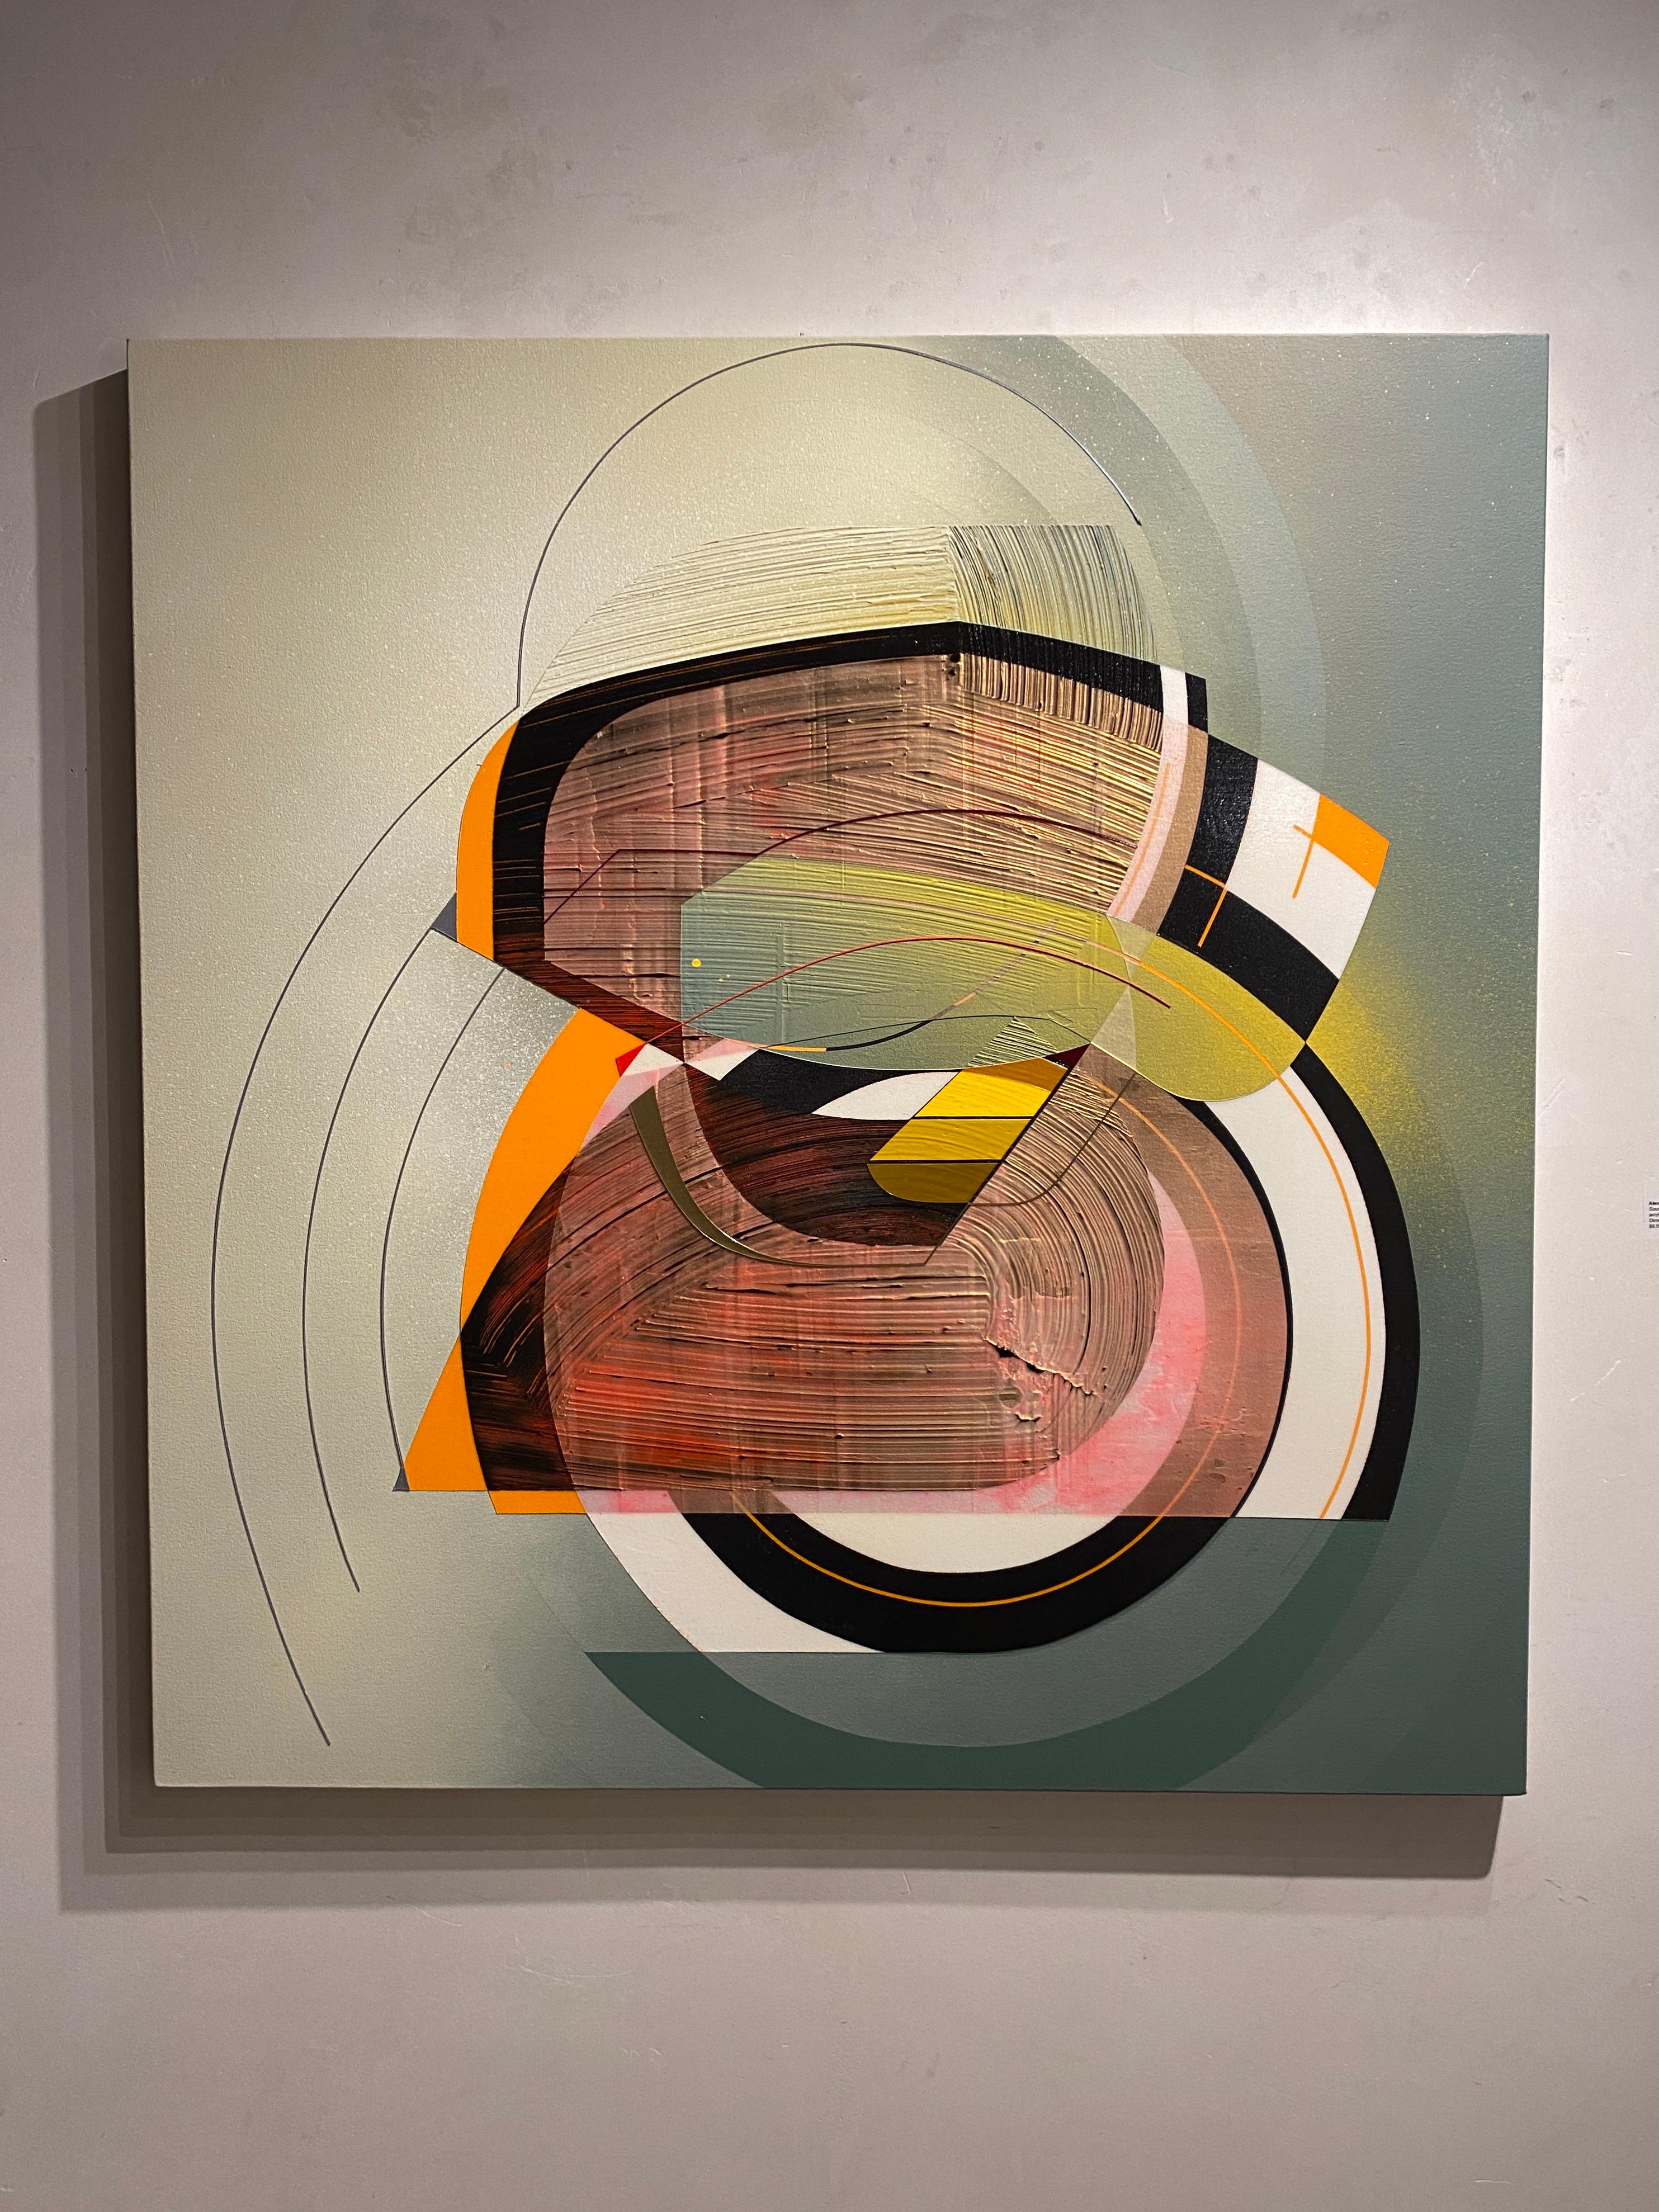 This is a graphic hard-edge abstract painting from California-based artist  Alex Couwenberg. 
Alex Couwenberg is a Southern California abstract painter deeply influenced by the art and culture of his local community. Couwenberg’s thin line, patterns